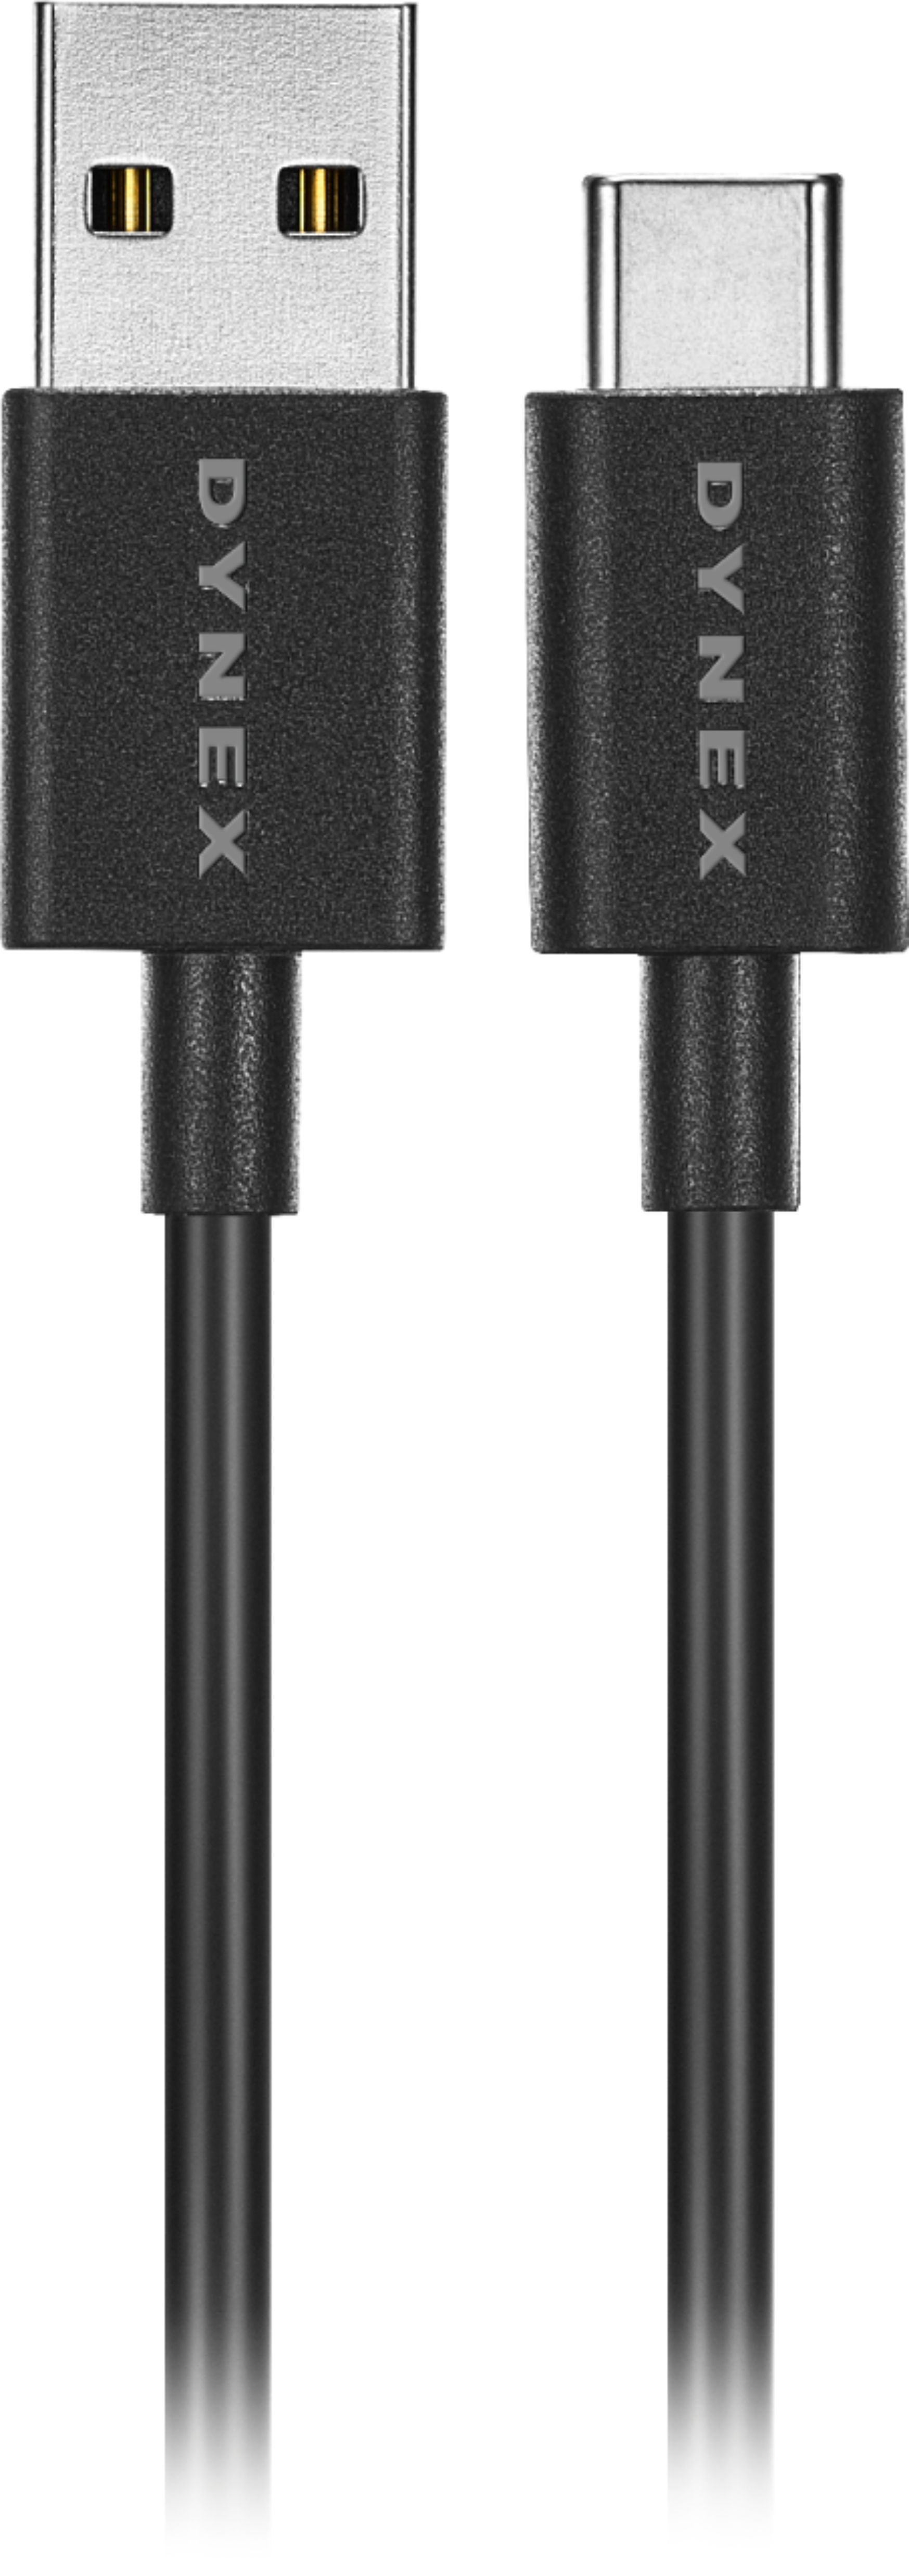 Angle View: Dynex™ - 3' USB Type C-to-USB Type A Charge-and-Sync Cable (2-Pack) - Black